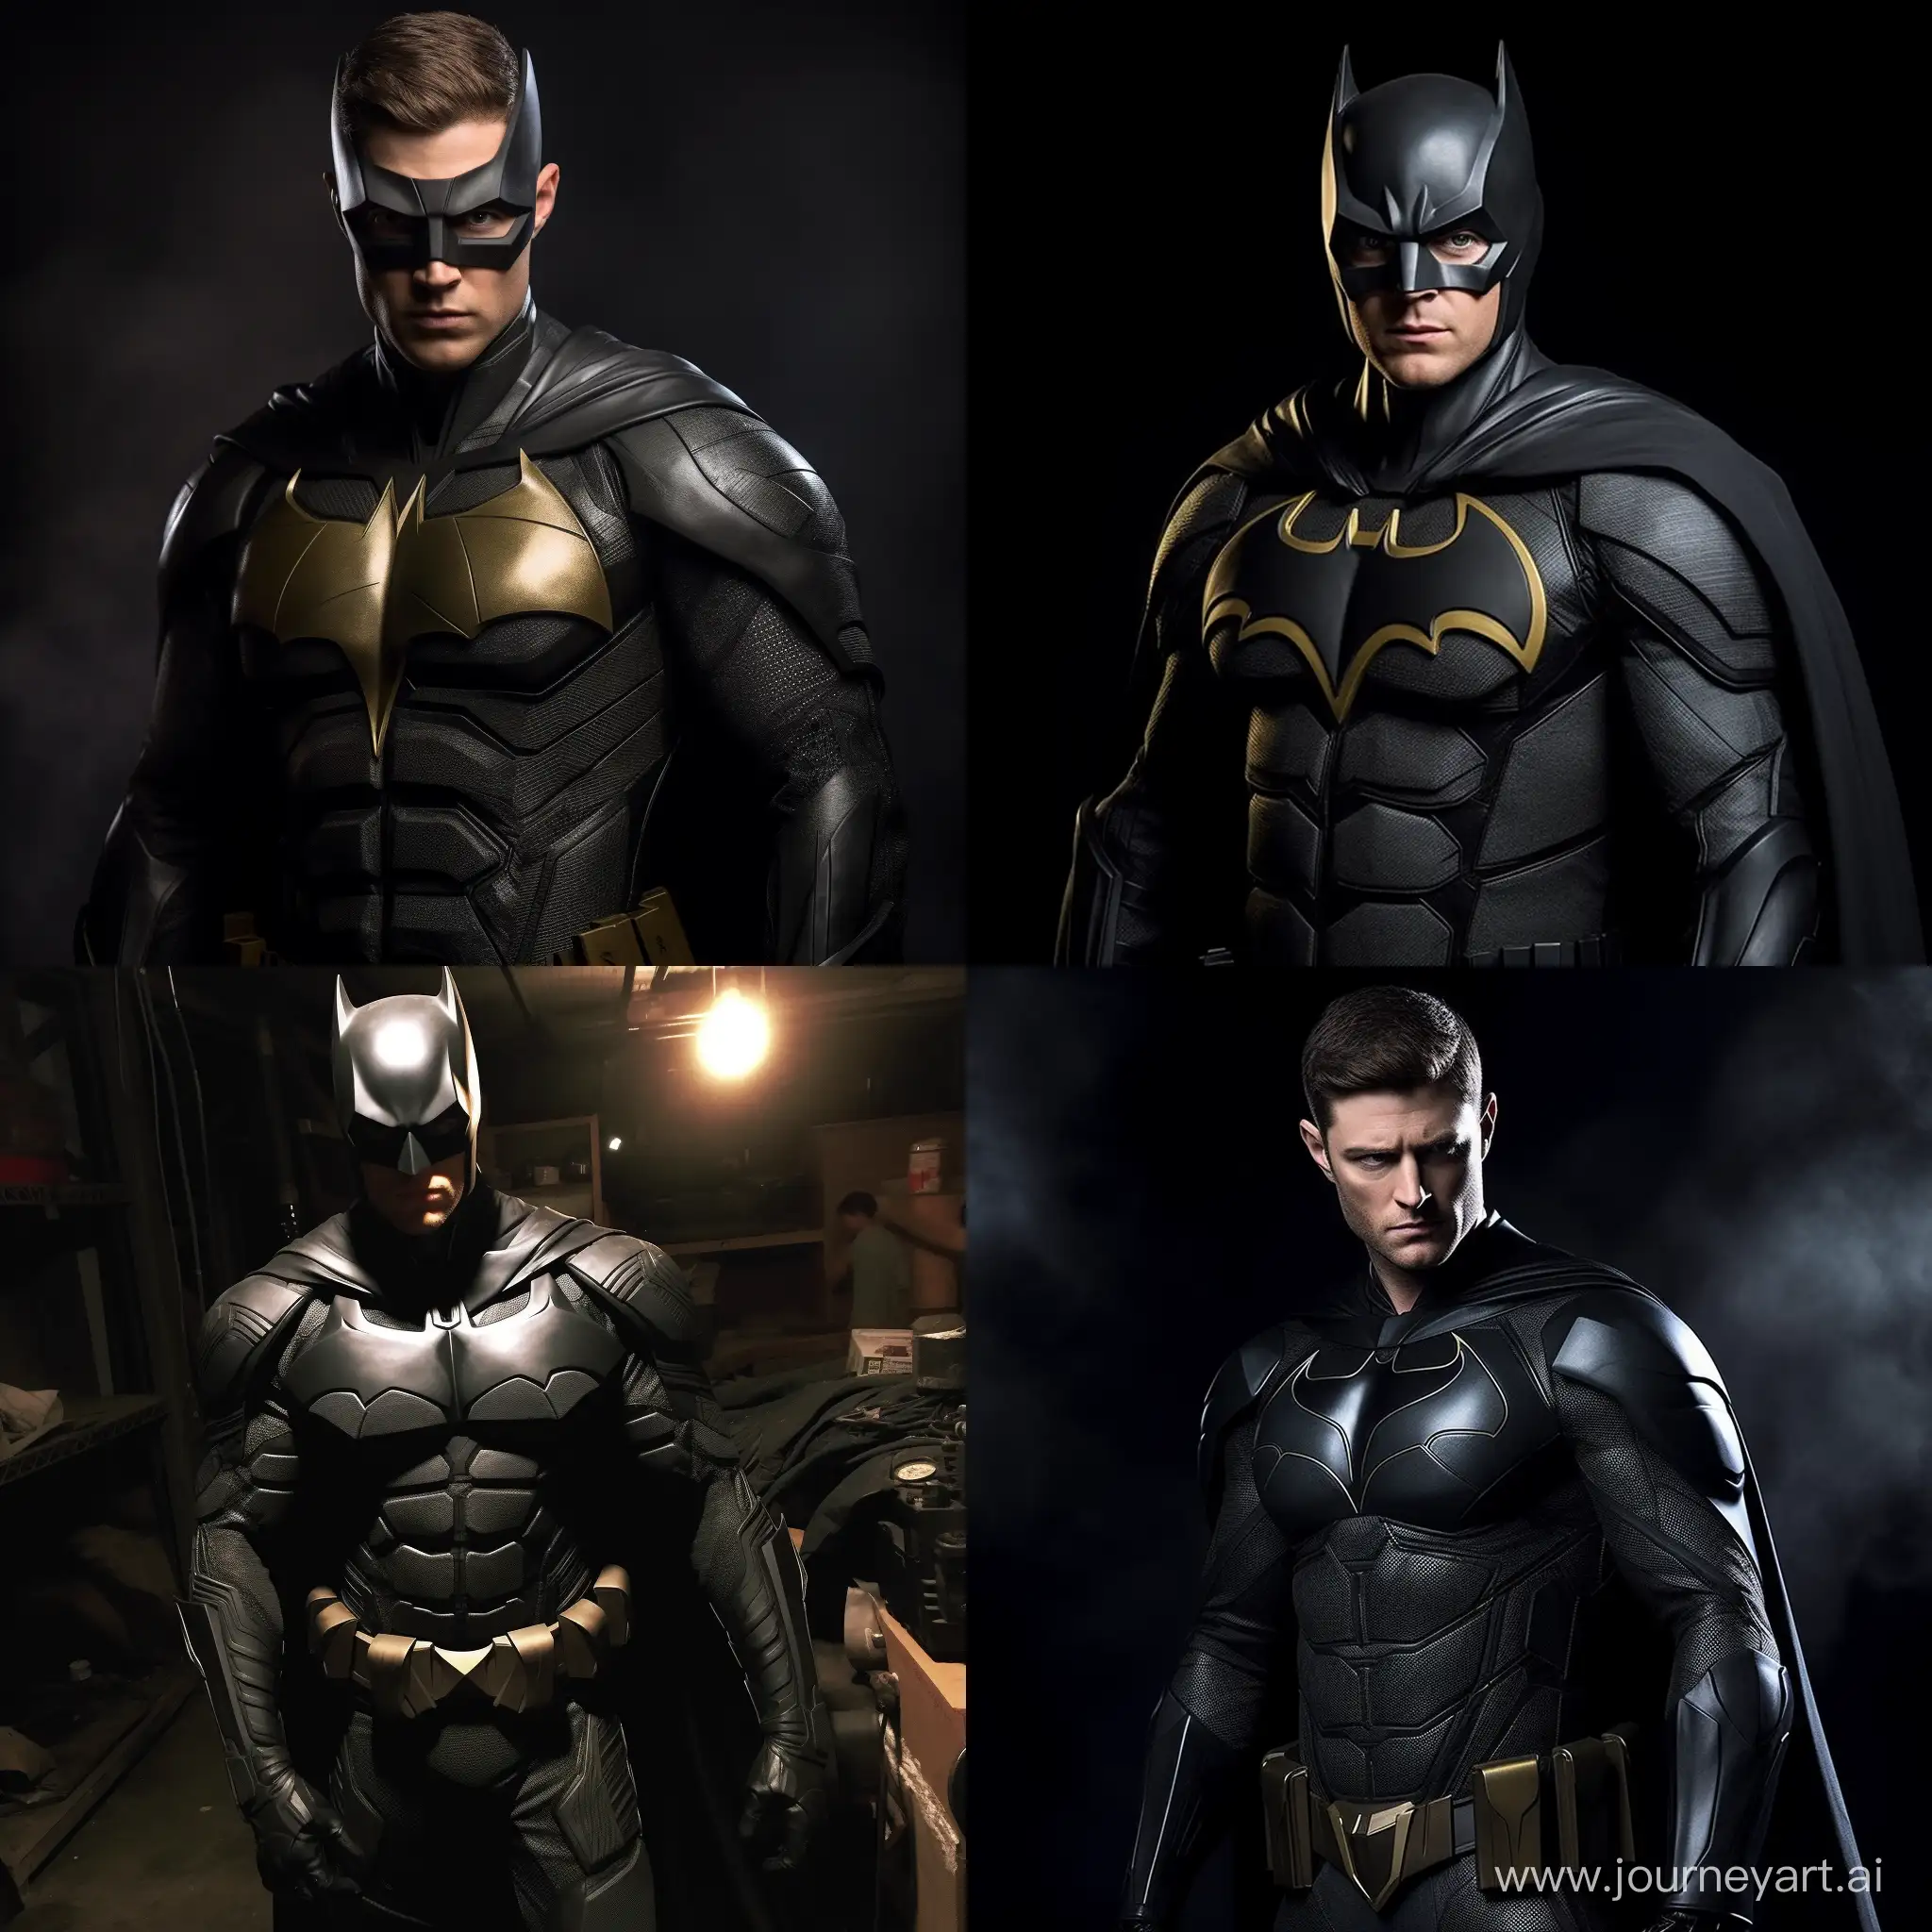 Jensen-Ackles-Captivating-in-Batman-Costume-Unveiling-the-Heroic-Persona